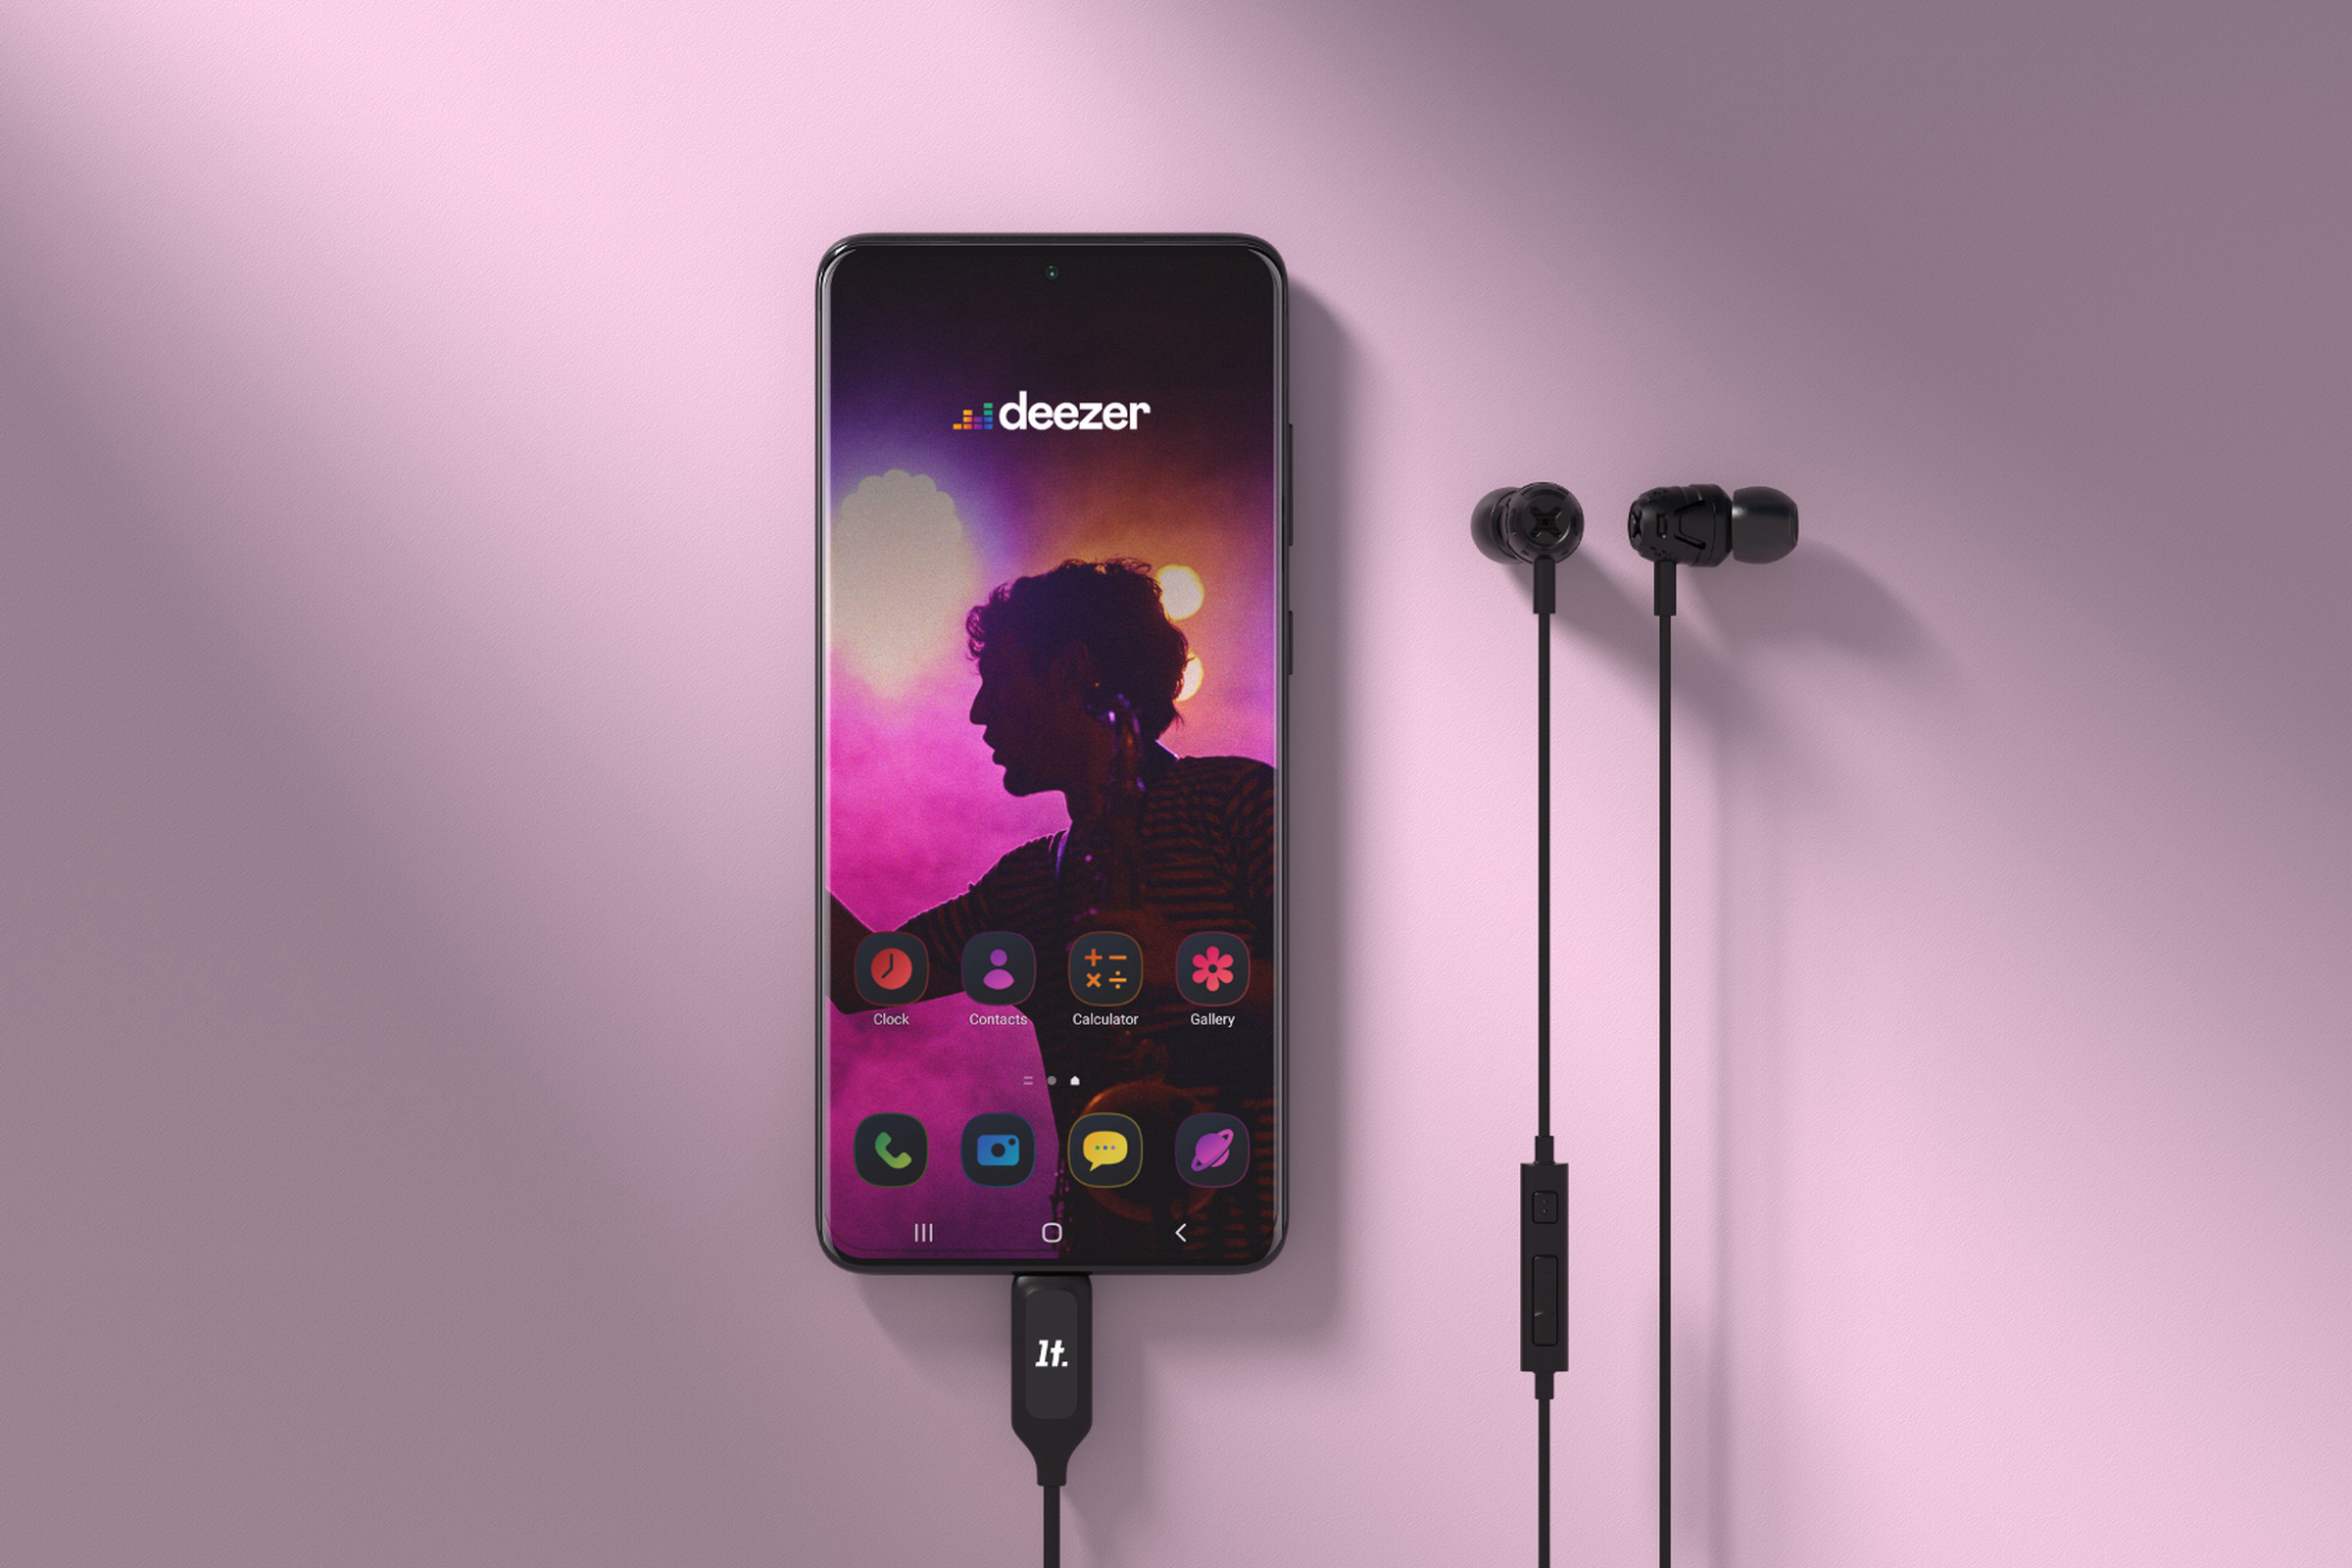 When used with a compatible Samsung device, the headphones launch a custom Deezer theme.